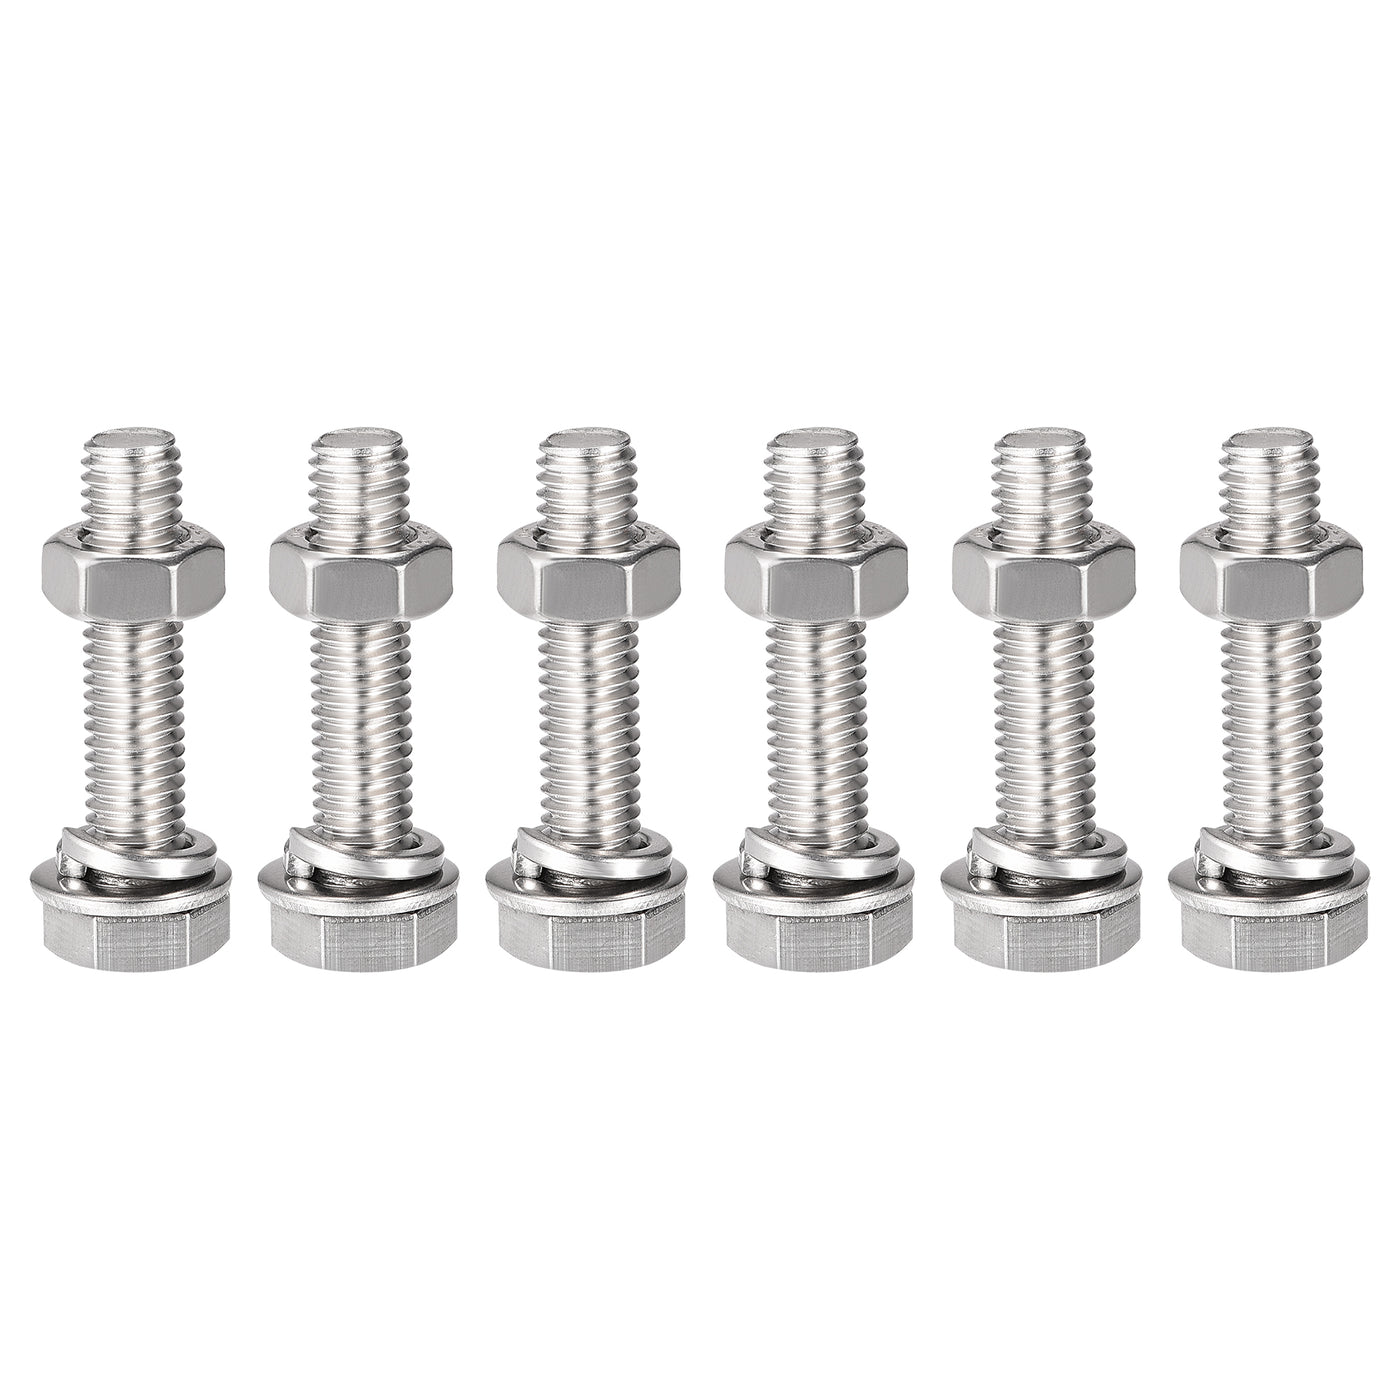 Uxcell Uxcell M8 x 35mm Hex Head Screws Bolts, Nuts, Flat & Lock Washers Kits, 304 Stainless Steel Fully Thread Hexagon Bolts 6 Sets